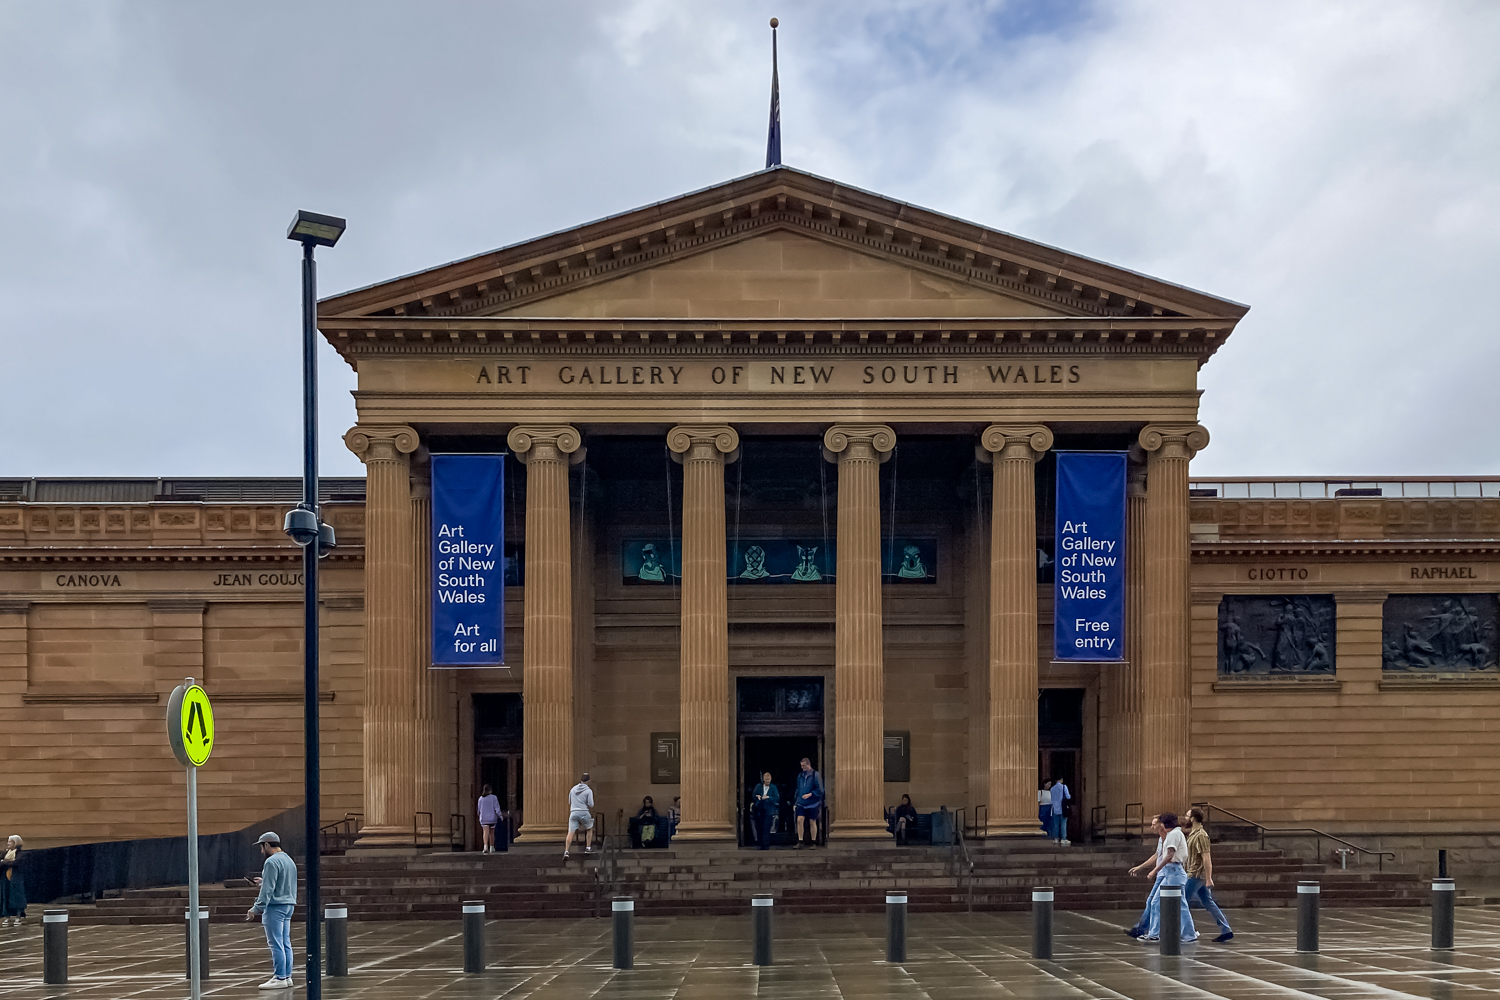 An old sandstone building with a triangle shaped roof and six columns at the entrance. The words Art Gallery of New South Wales on the front. Two blue signs either side of the entrance.